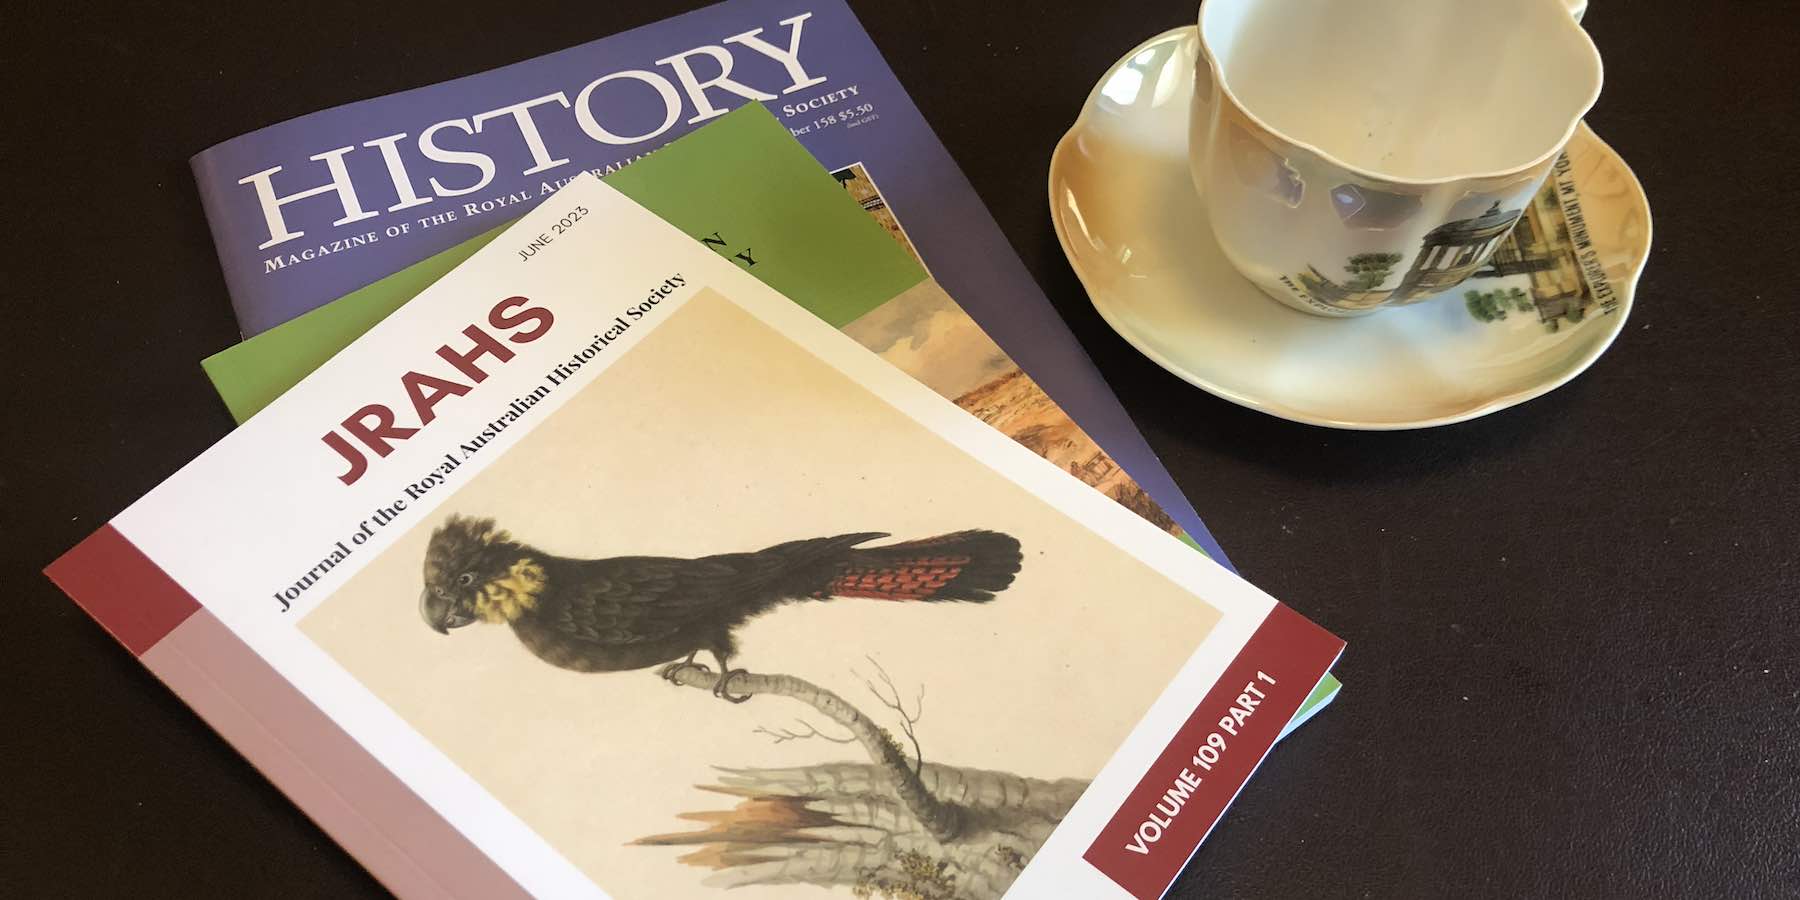 Photograph of RAHS journal and magazine beside a tea cup and saucer. The journal's cover features a picture of a black cockatoo.